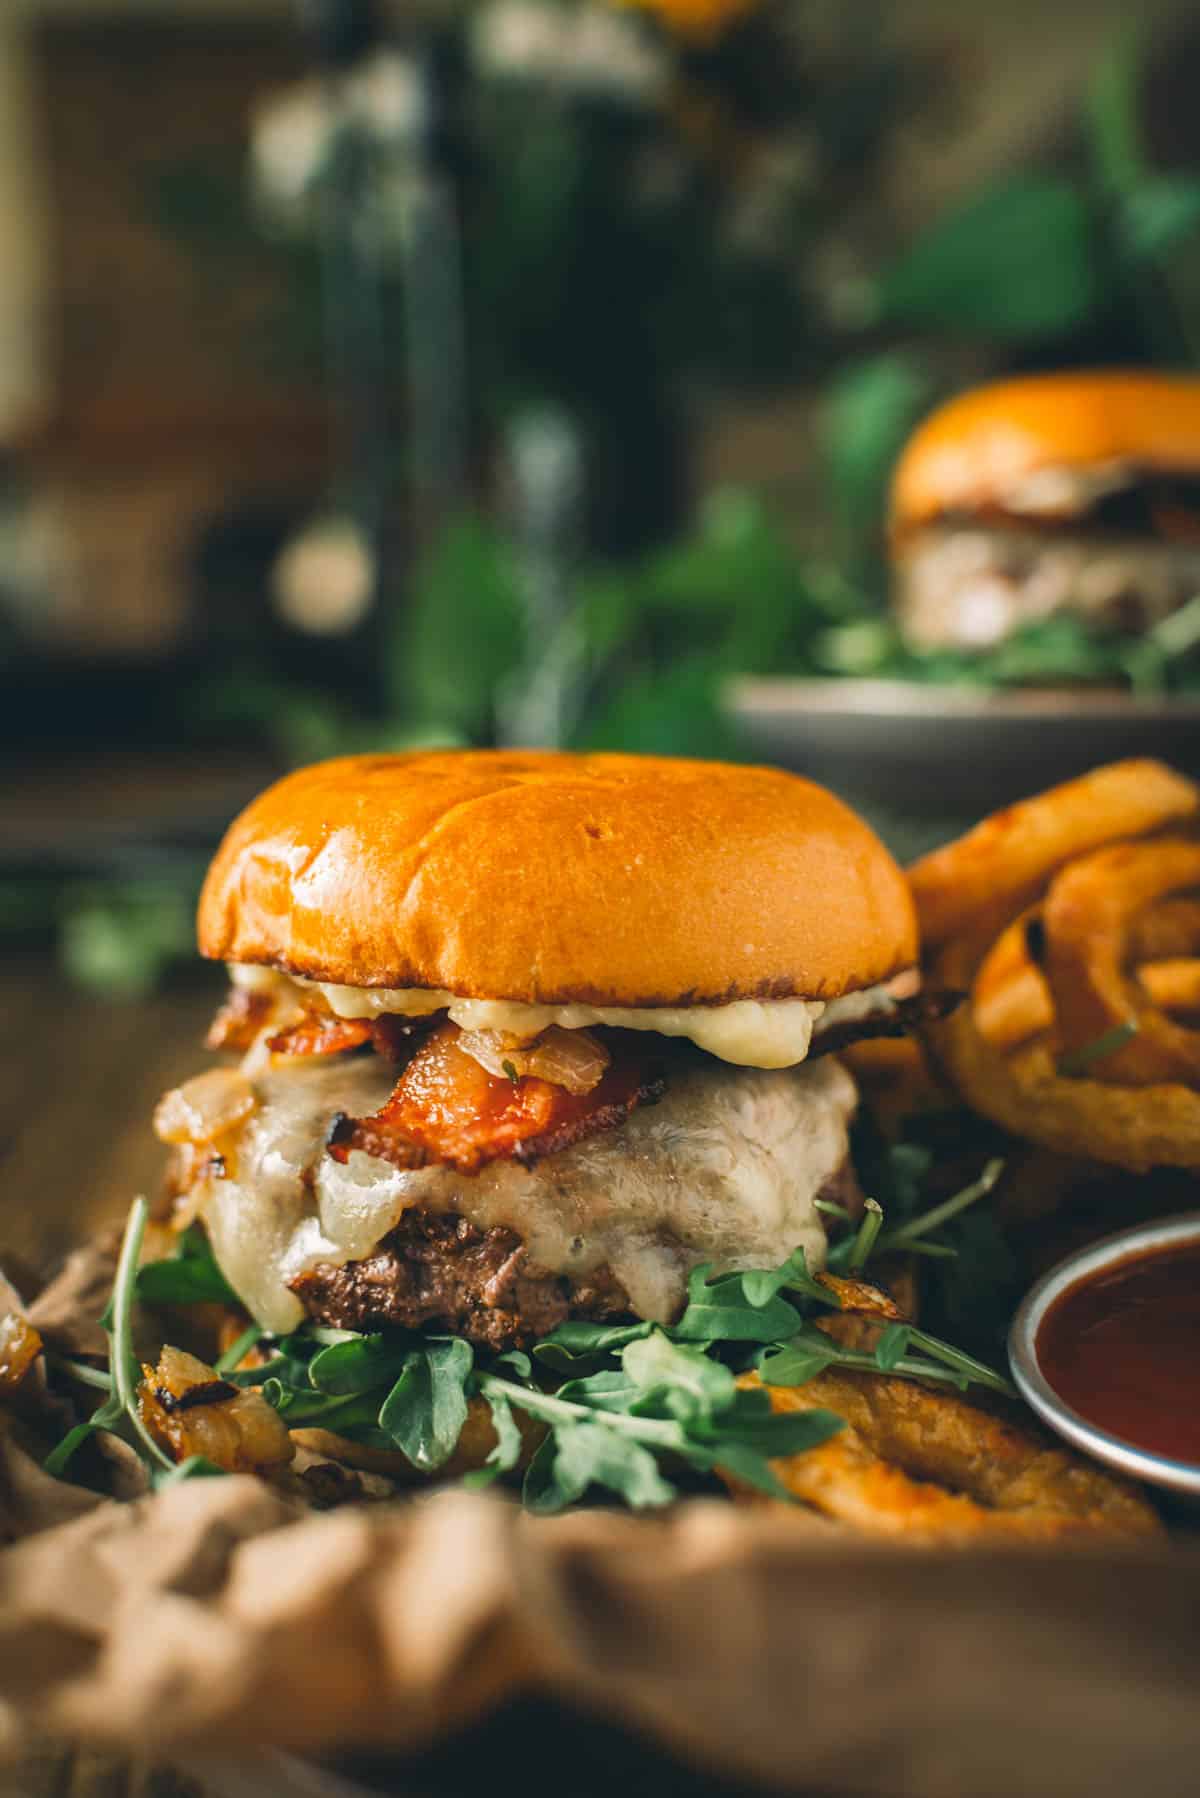 A garlic butter bacon cheeseburger with arugula, caramelized onions, and bacon on a bun, served with a side of curly fries and dipping sauce.